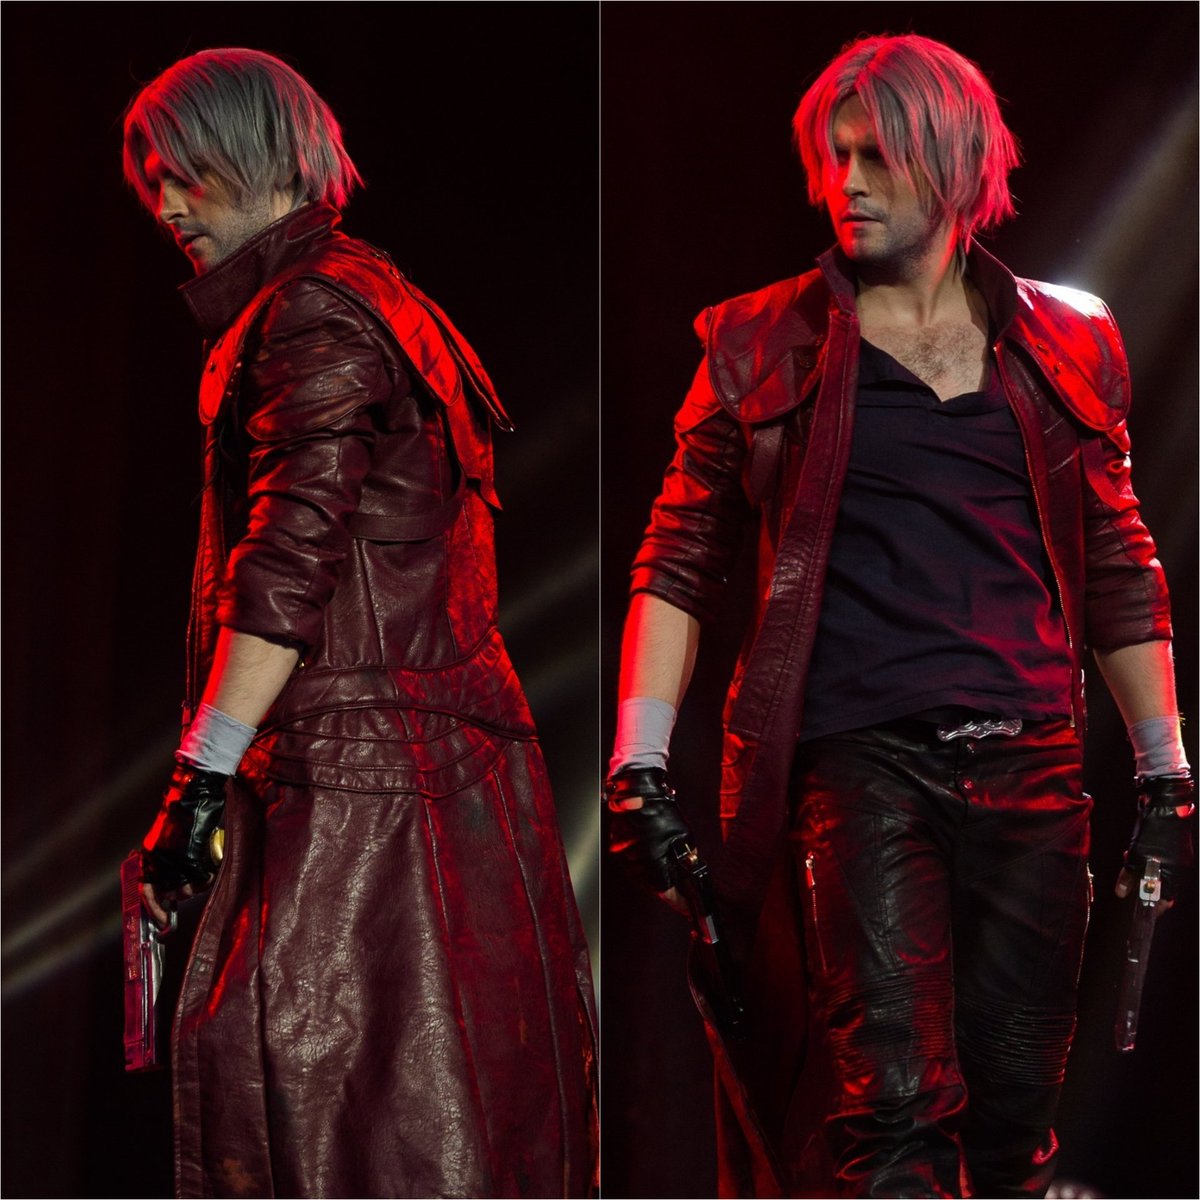 One of my fav cosplay for this year #dante #DevilMayCry.